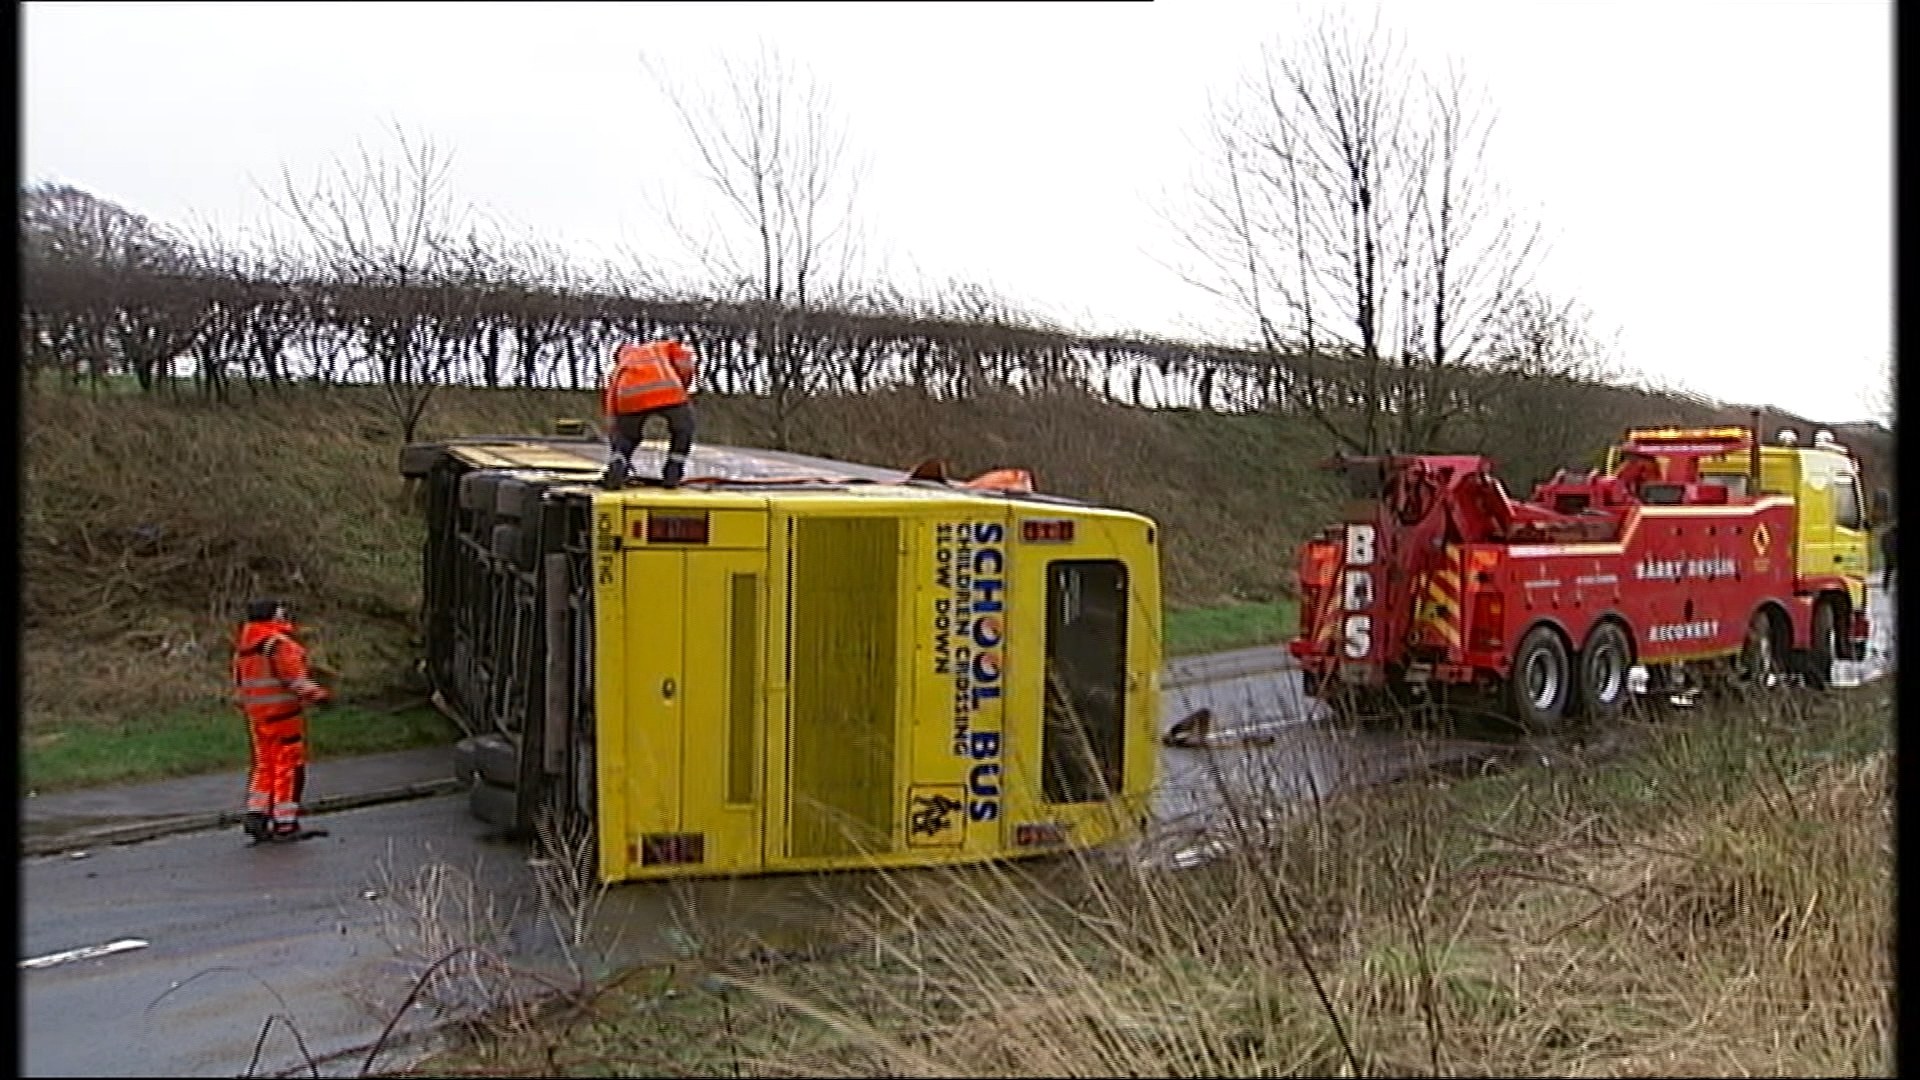 This school bus overturned, but fortunately no pupils were on board at the time.